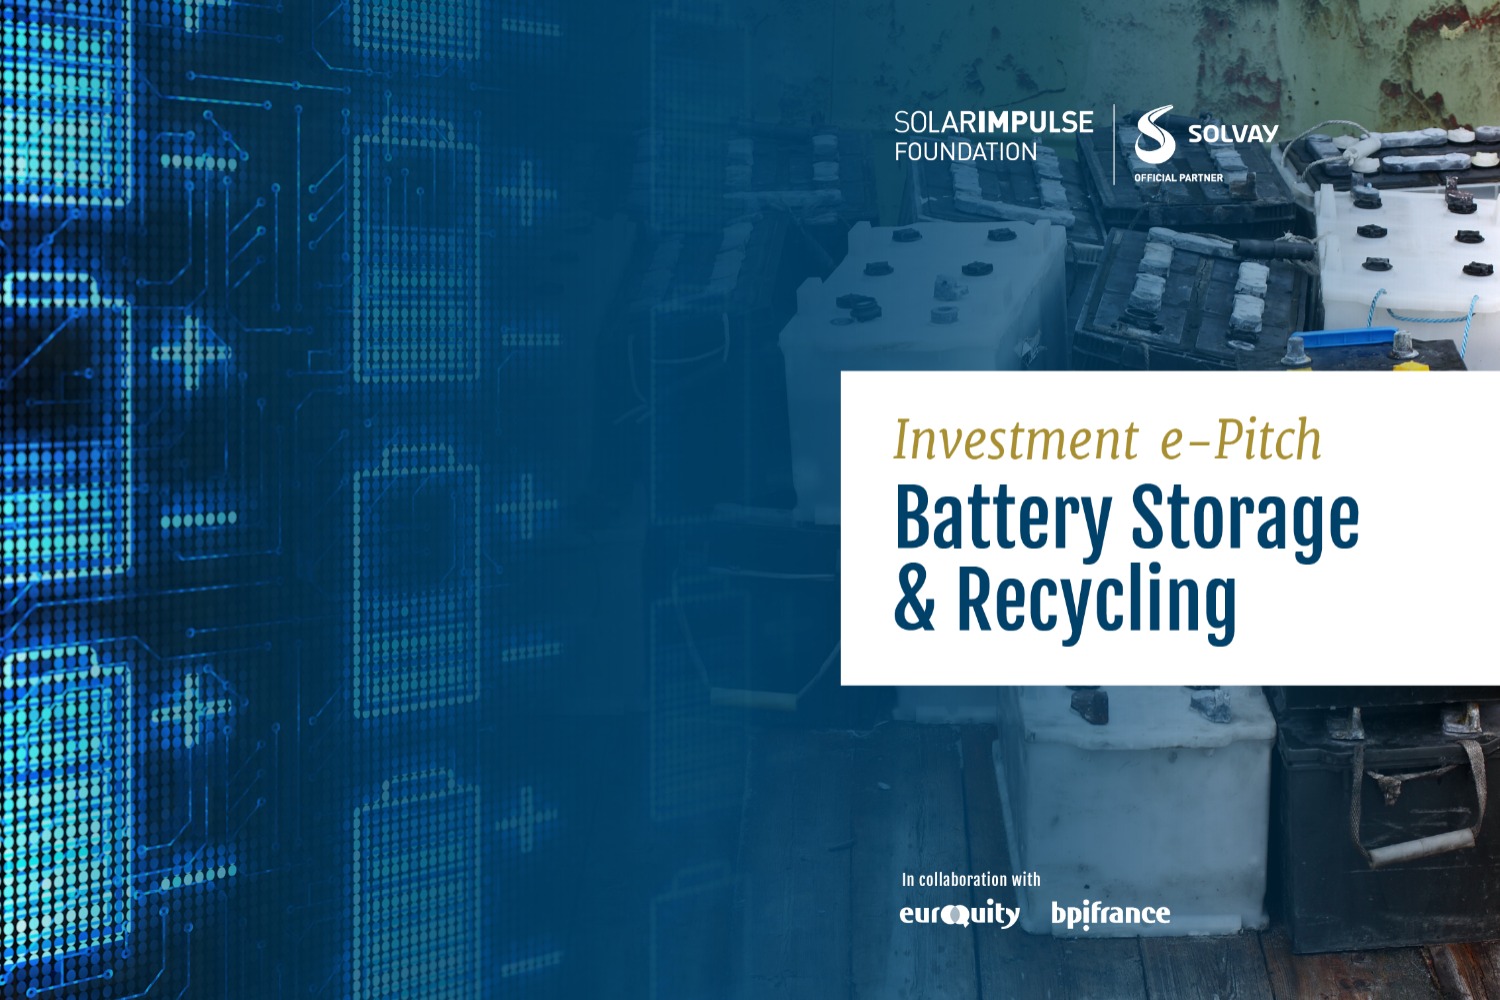 Battery storage & recycling in partnership with Solvay